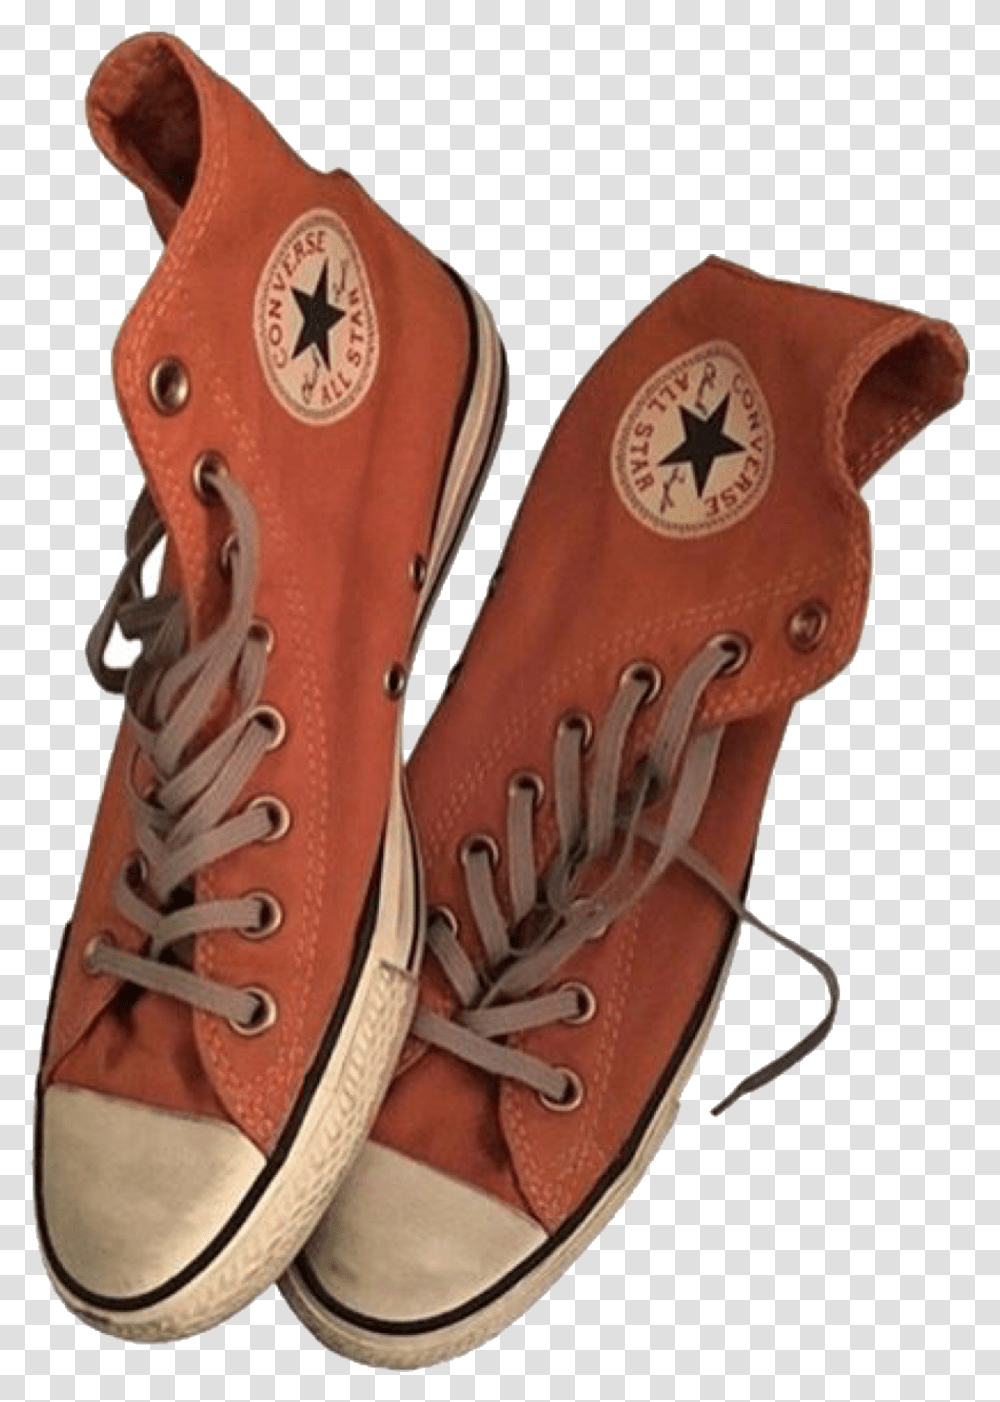 Pin By Strawberrypeach Pngs Orange Shoes Converse Shoes Converse All Star, Clothing, Apparel, Footwear, Sneaker Transparent Png